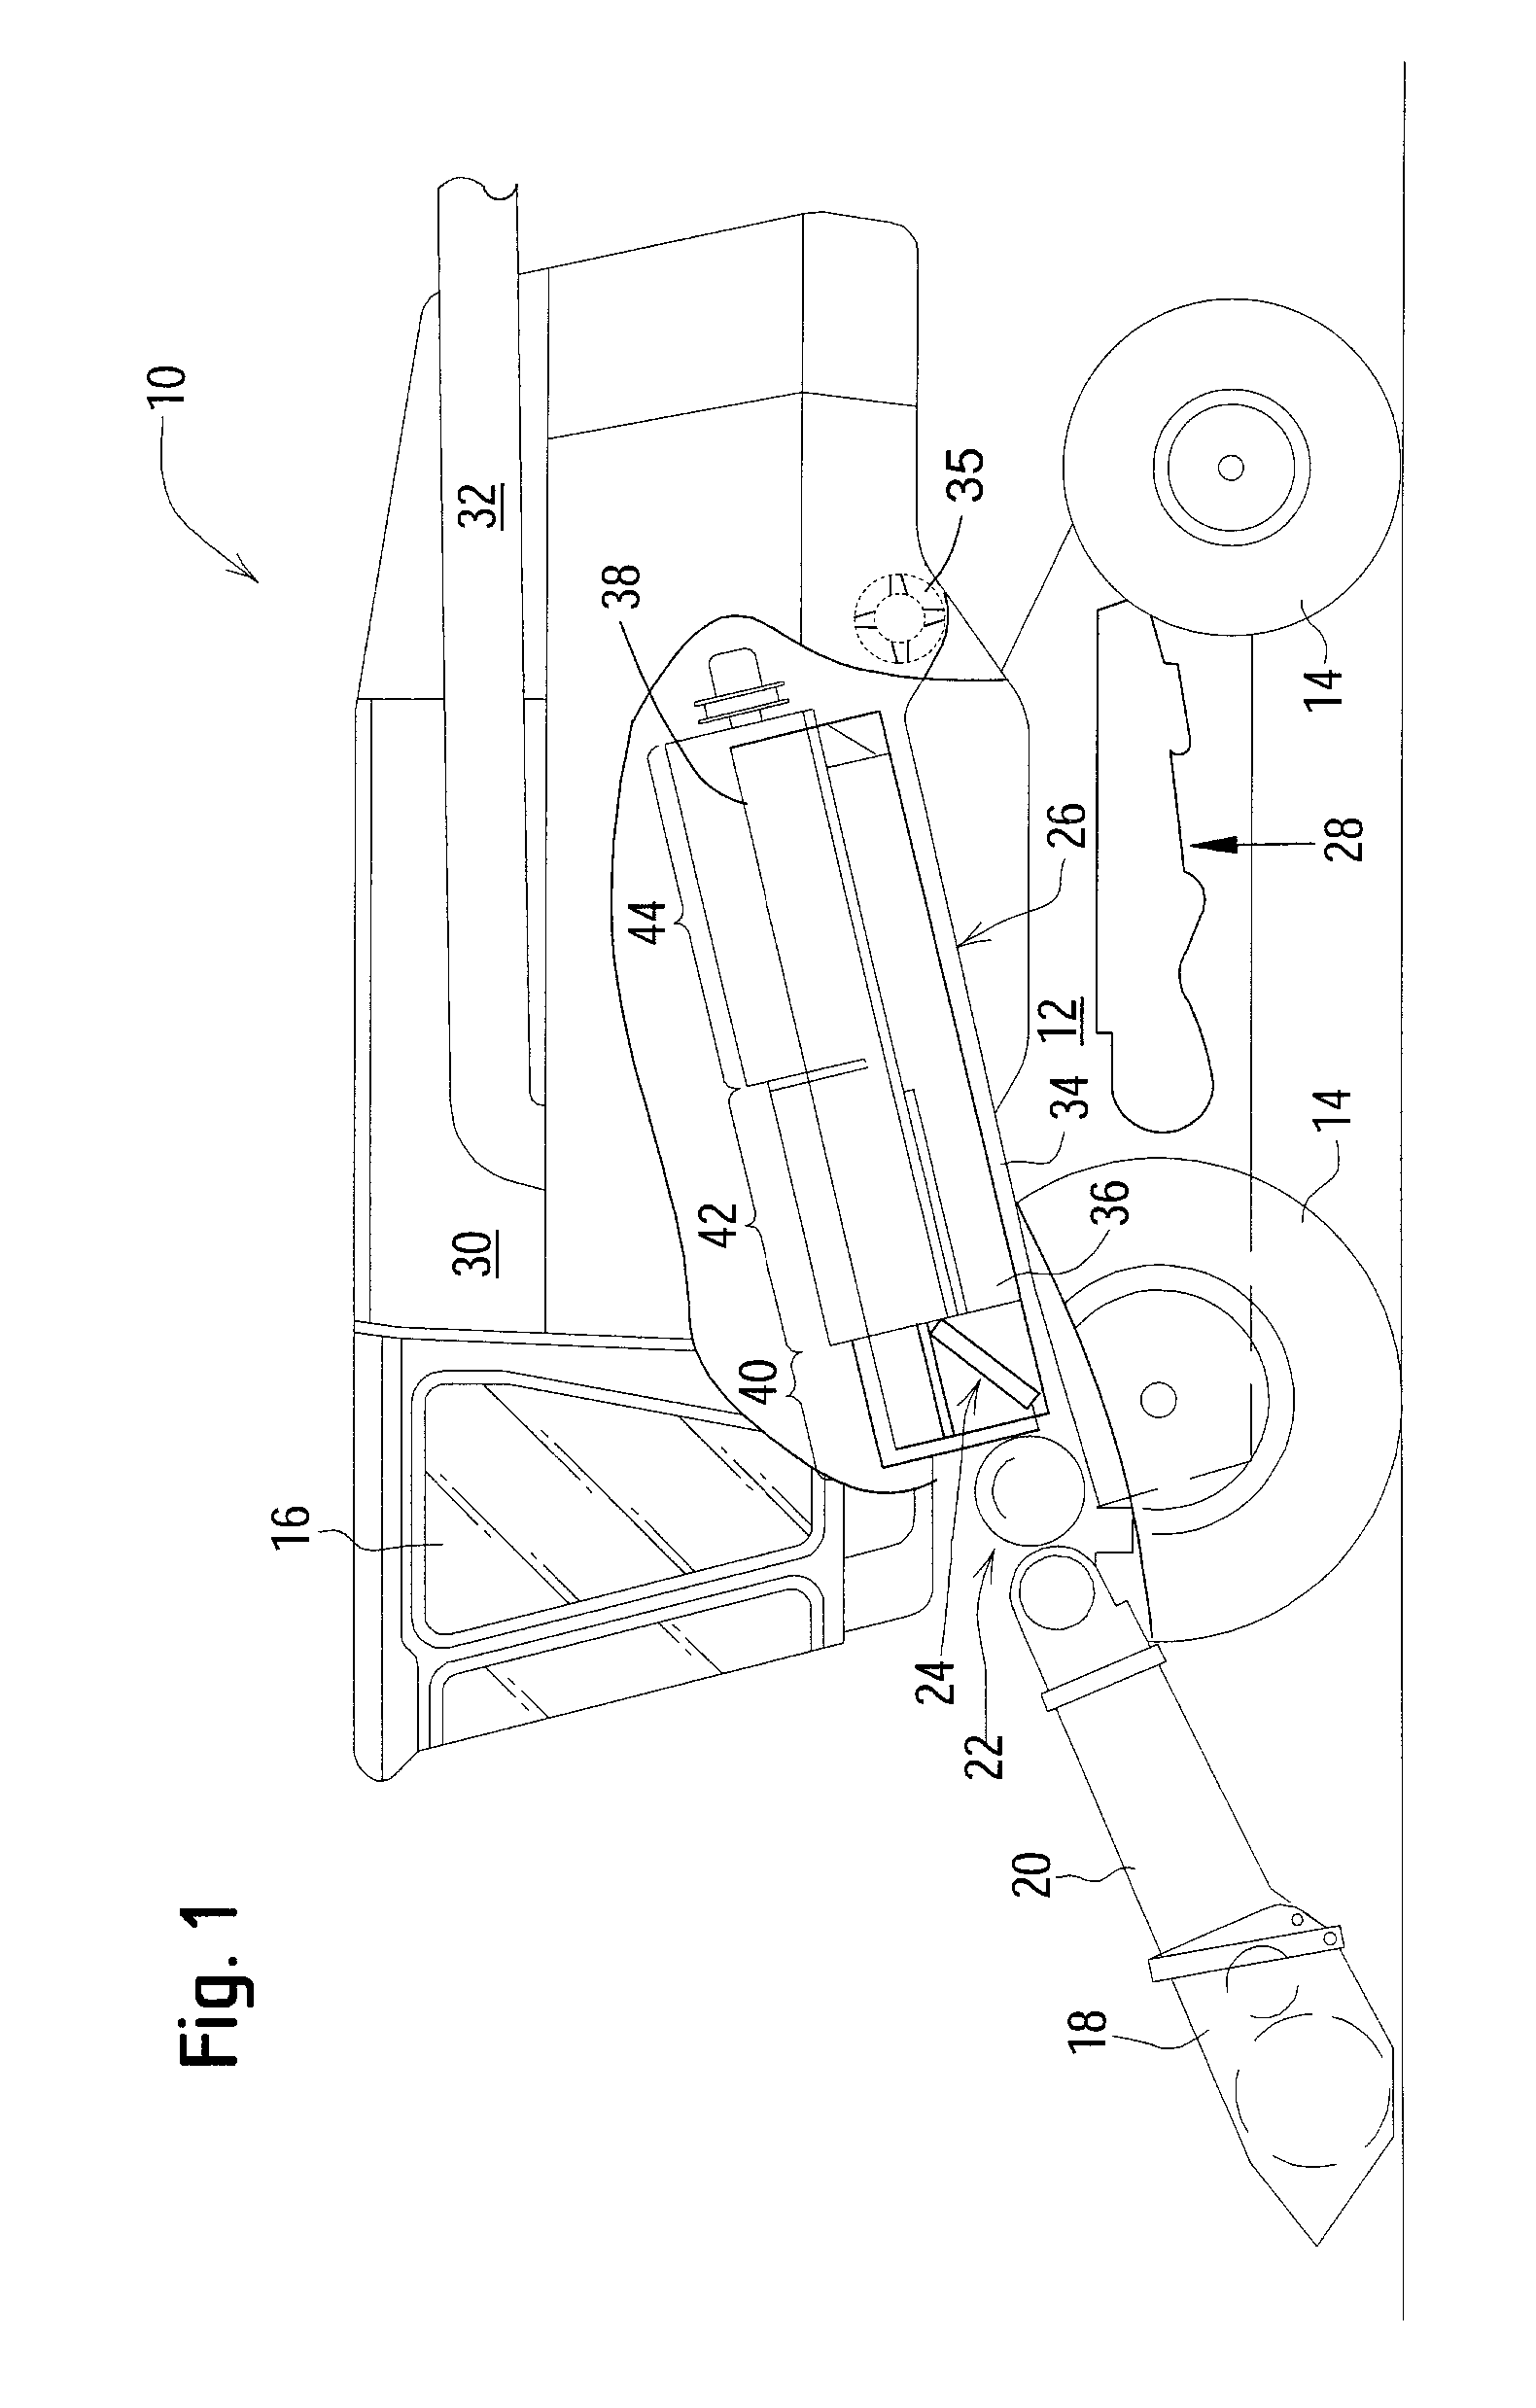 Harvested crop processing unit with number of circulation circuits depending on throughput